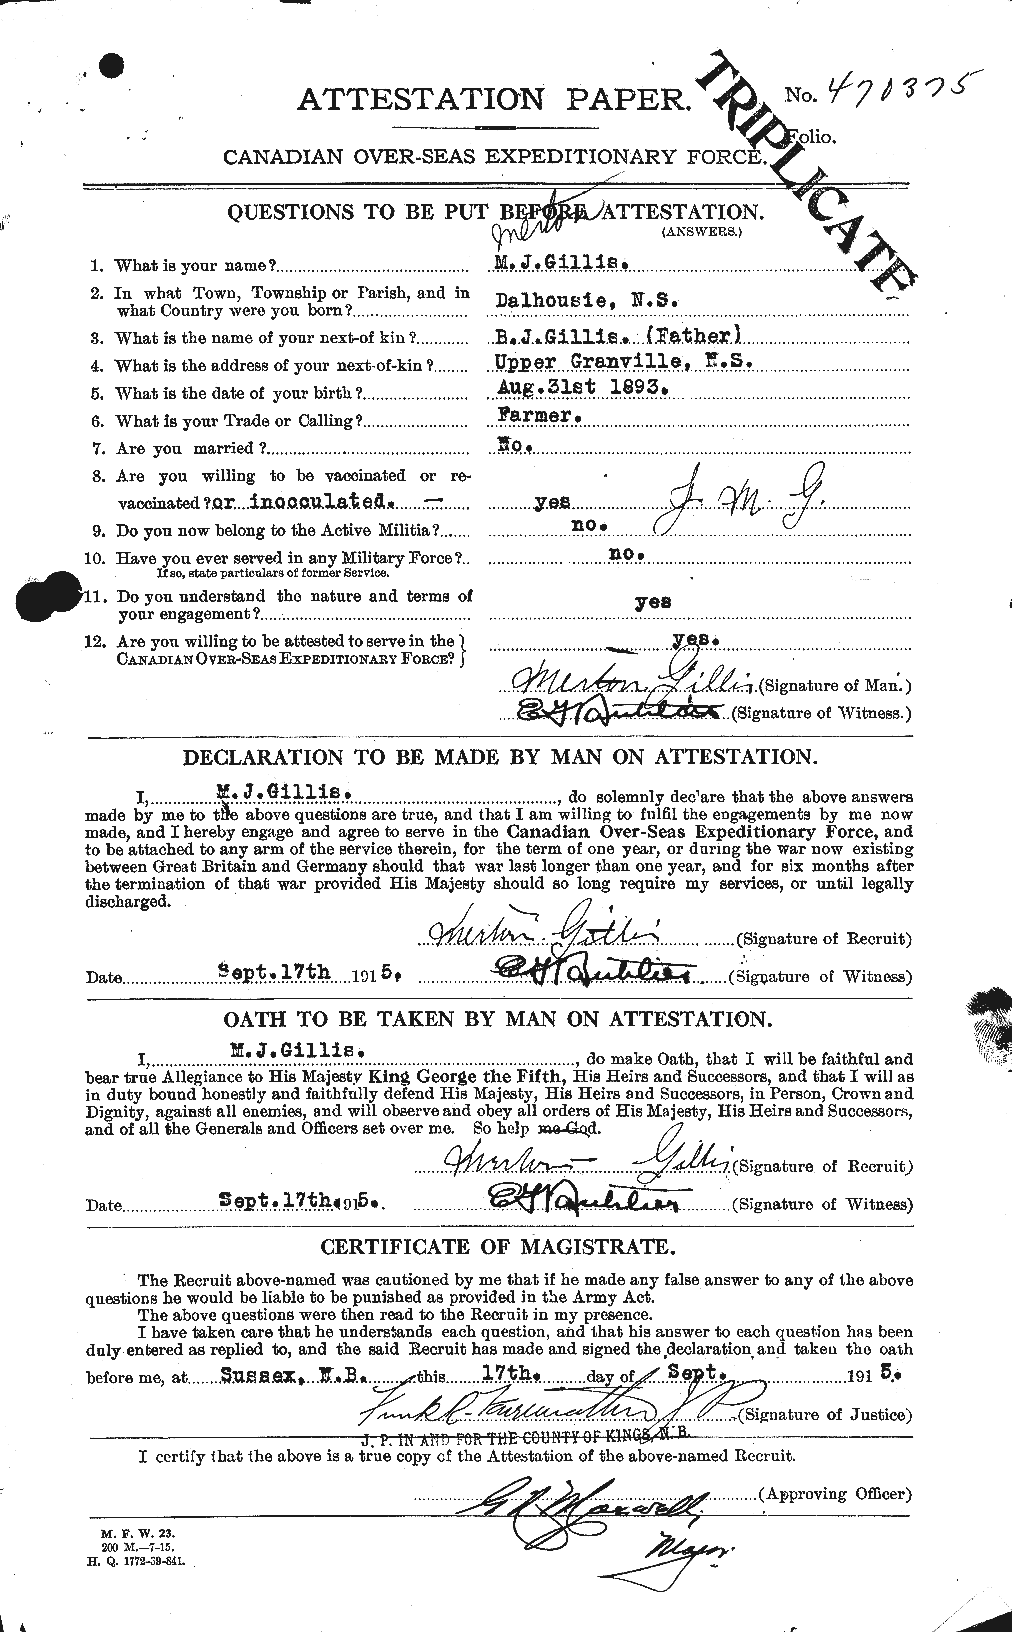 Personnel Records of the First World War - CEF 348114a